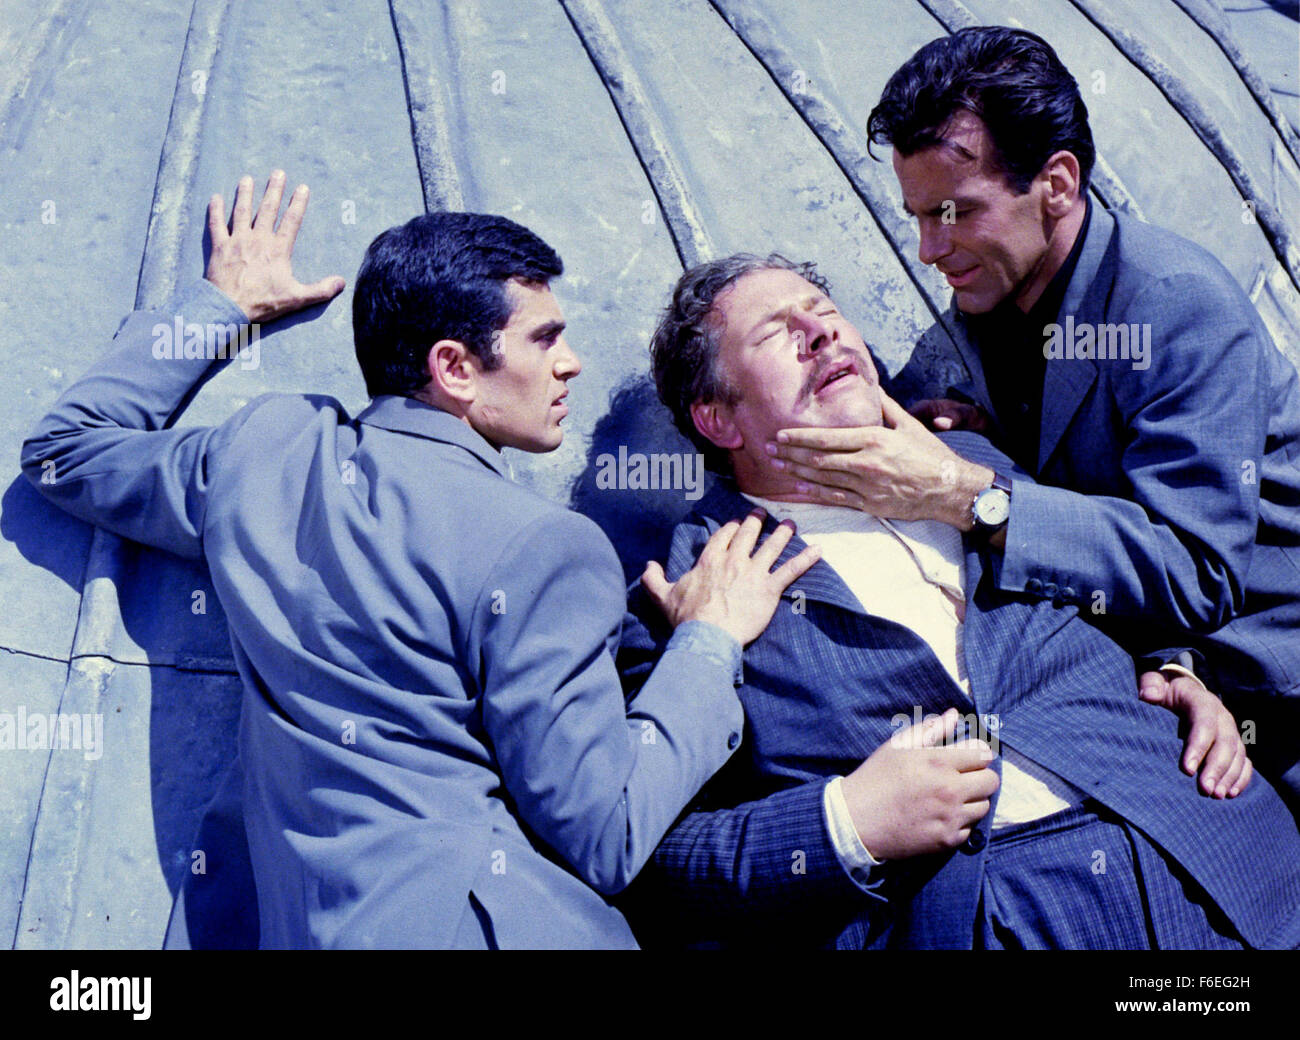 RELEASE DATE: Sep 2nd, 1964. MOVIE TITLE: Topkapi. STUDIO: MGM. PLOT: A small-time con-man with passport problems gets mixed up with a gang of world-class jewelry thieves plotting to rob the Topkapi museum in Istanbul. Turkish intelligence, suspecting arms smuggling, gets involved, and under pressure the con-man rises to heights he'd never dreamed of. PICTURED: PETER USTINOV as Arthur Simon Simpson, and MAXIMILIAN SCHELL as Walter Harper. Stock Photo